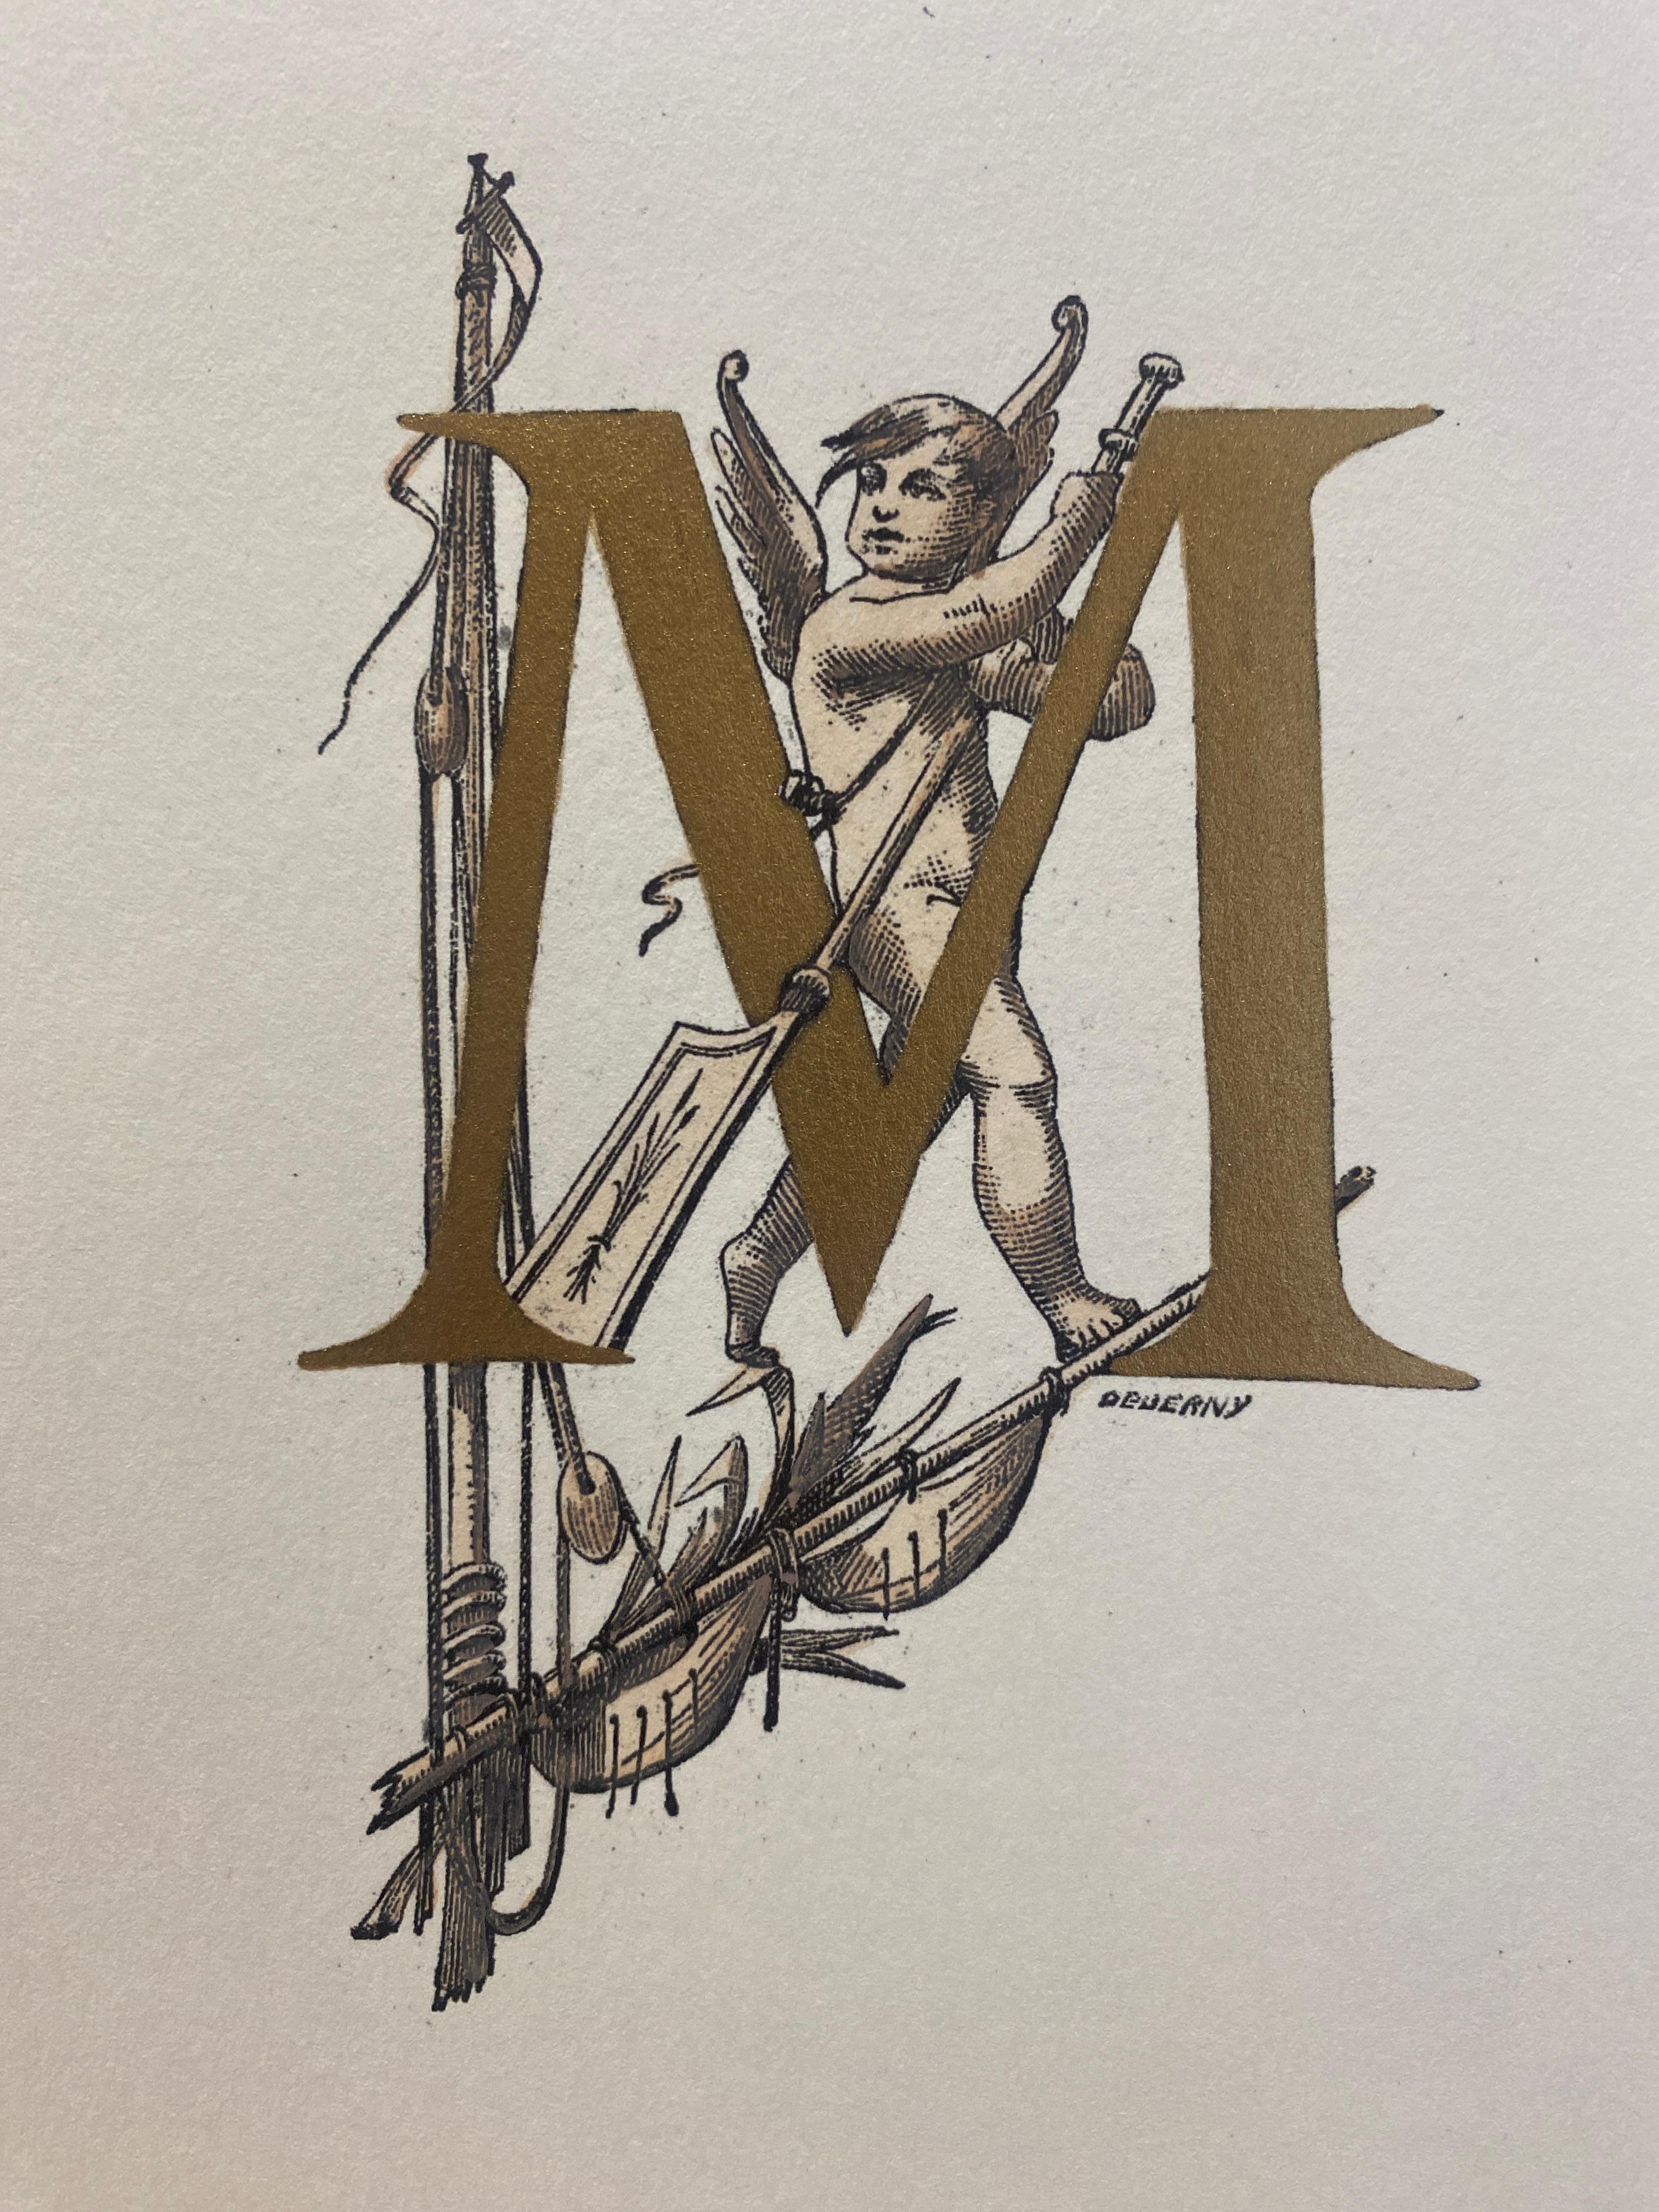 Elegant hand-pressed print representing  some letters of the alphabet with allegorical figure,  illustrated through the image of small grotesque angels translating the letters through arts and crafts. In this one we find the letter M representing